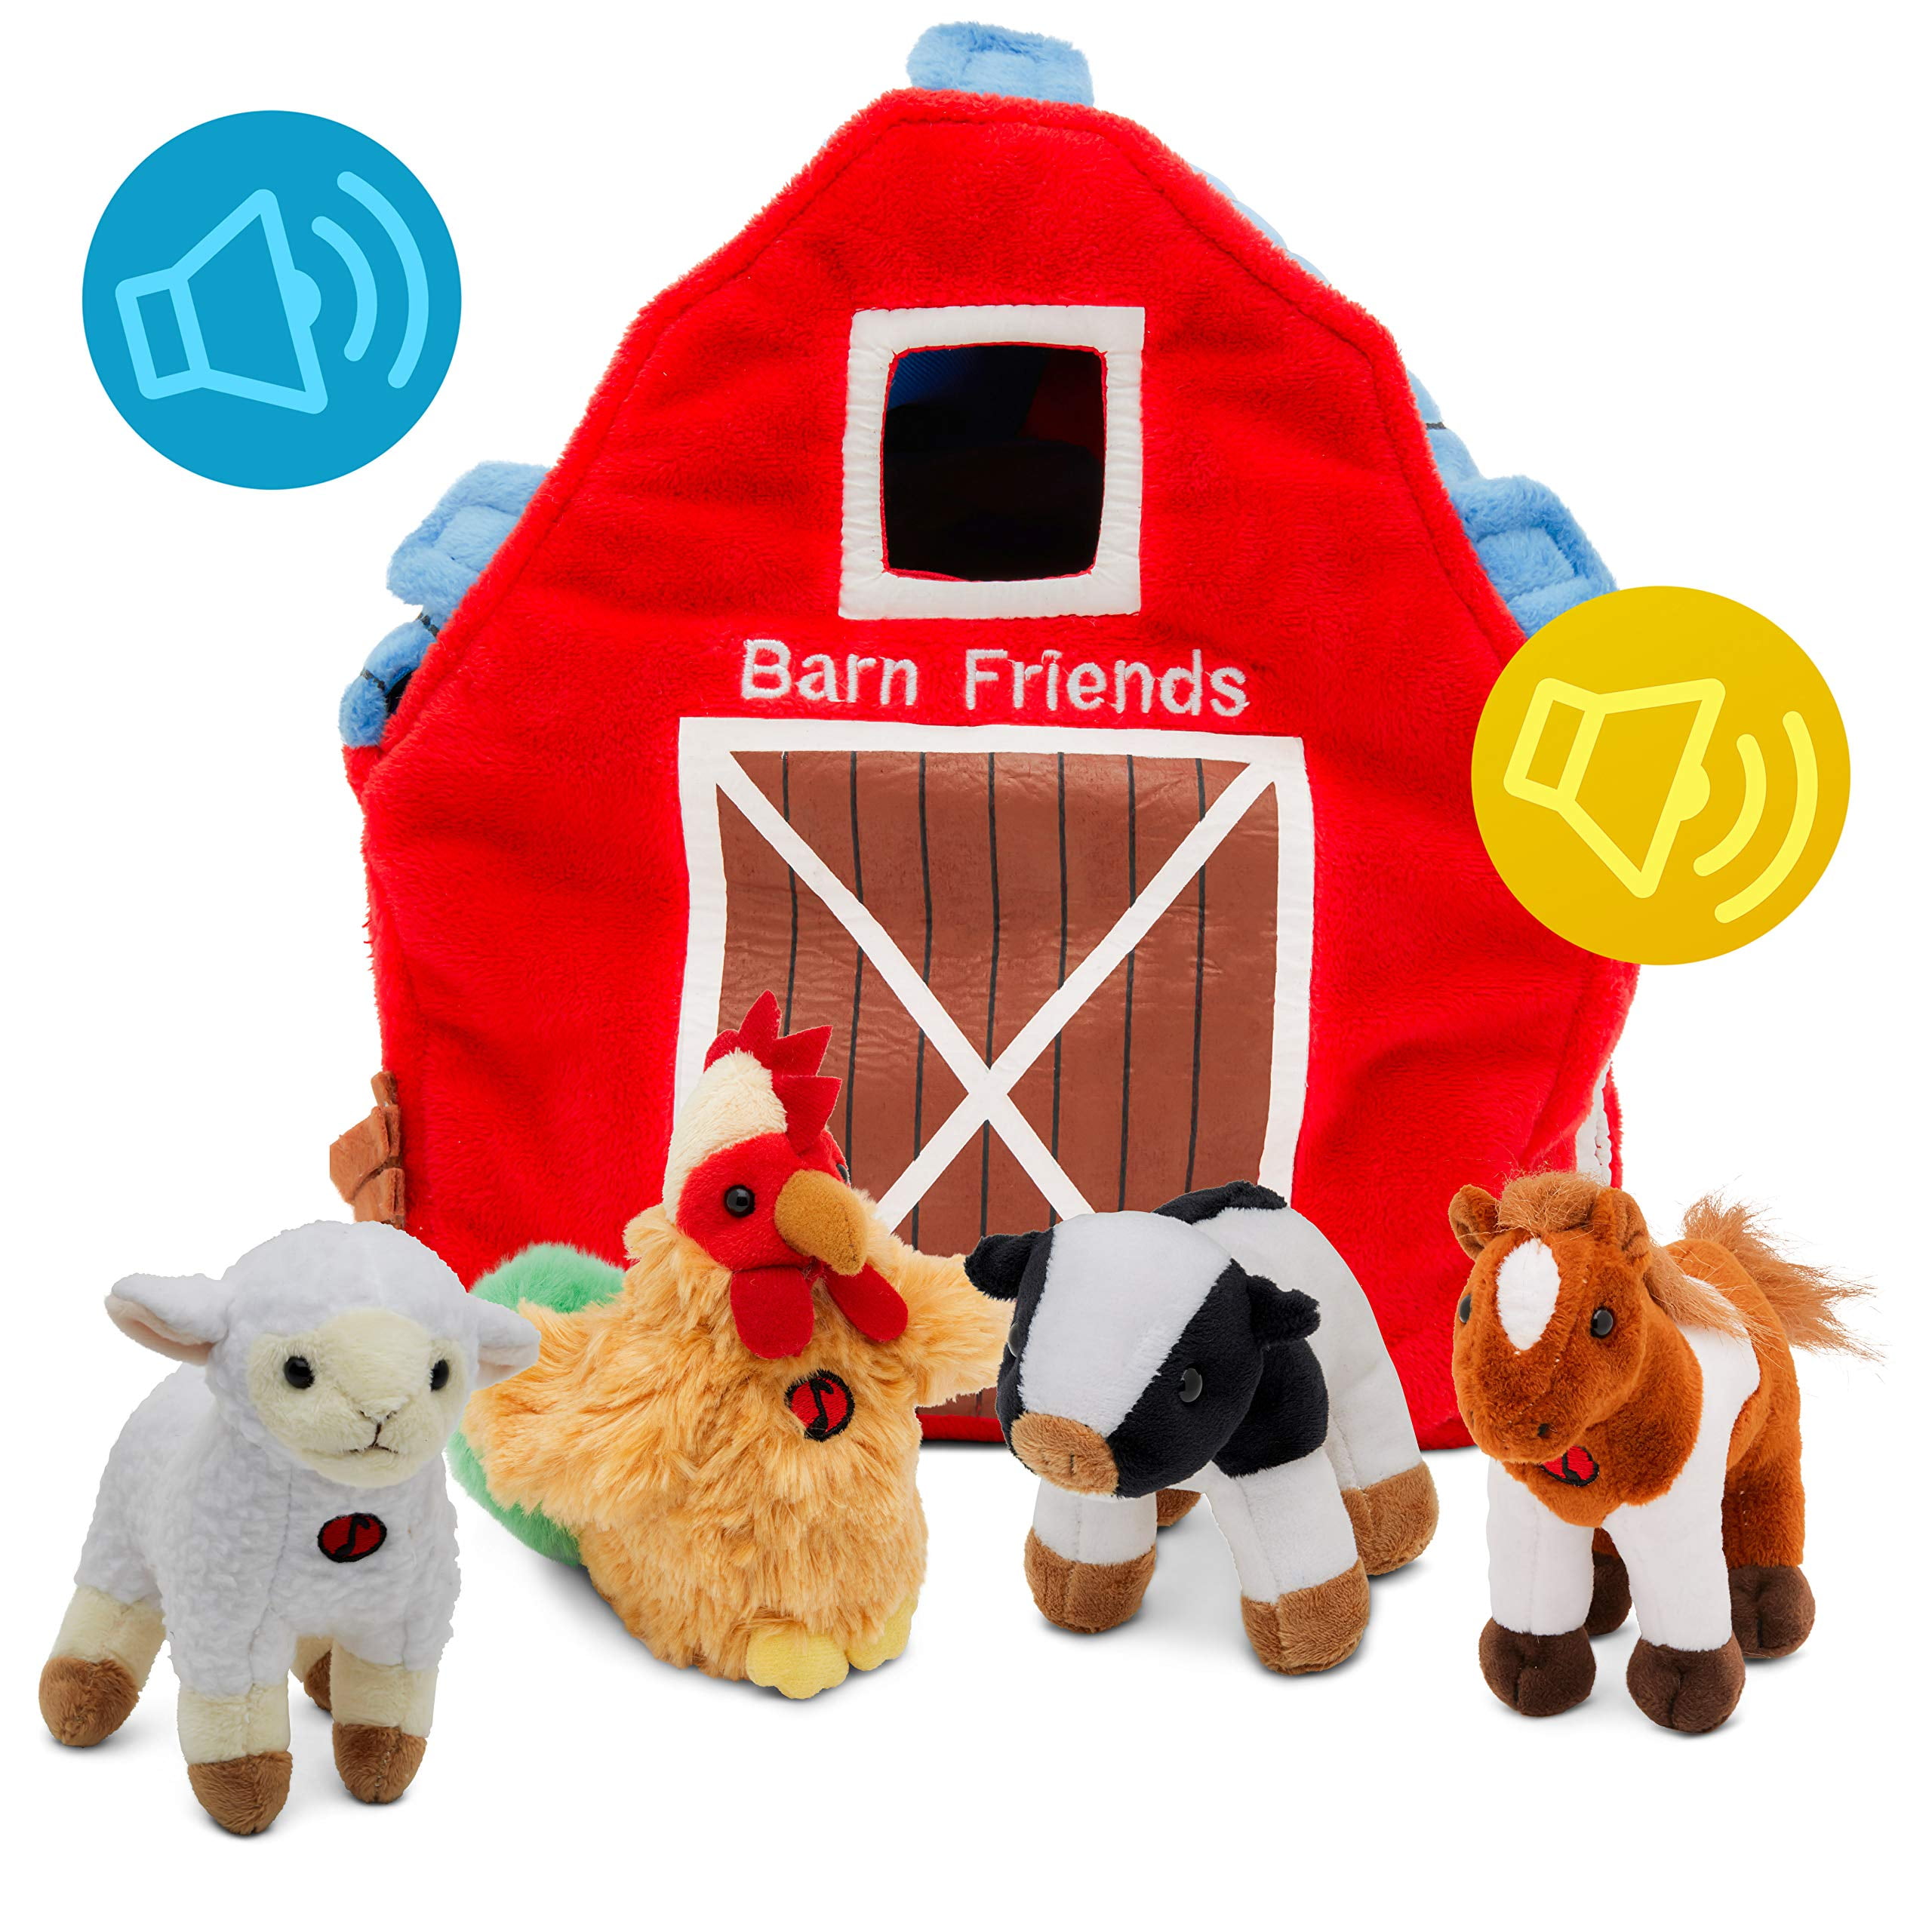 NWT Plush Dixie Barn Carrier With 4 Friends 